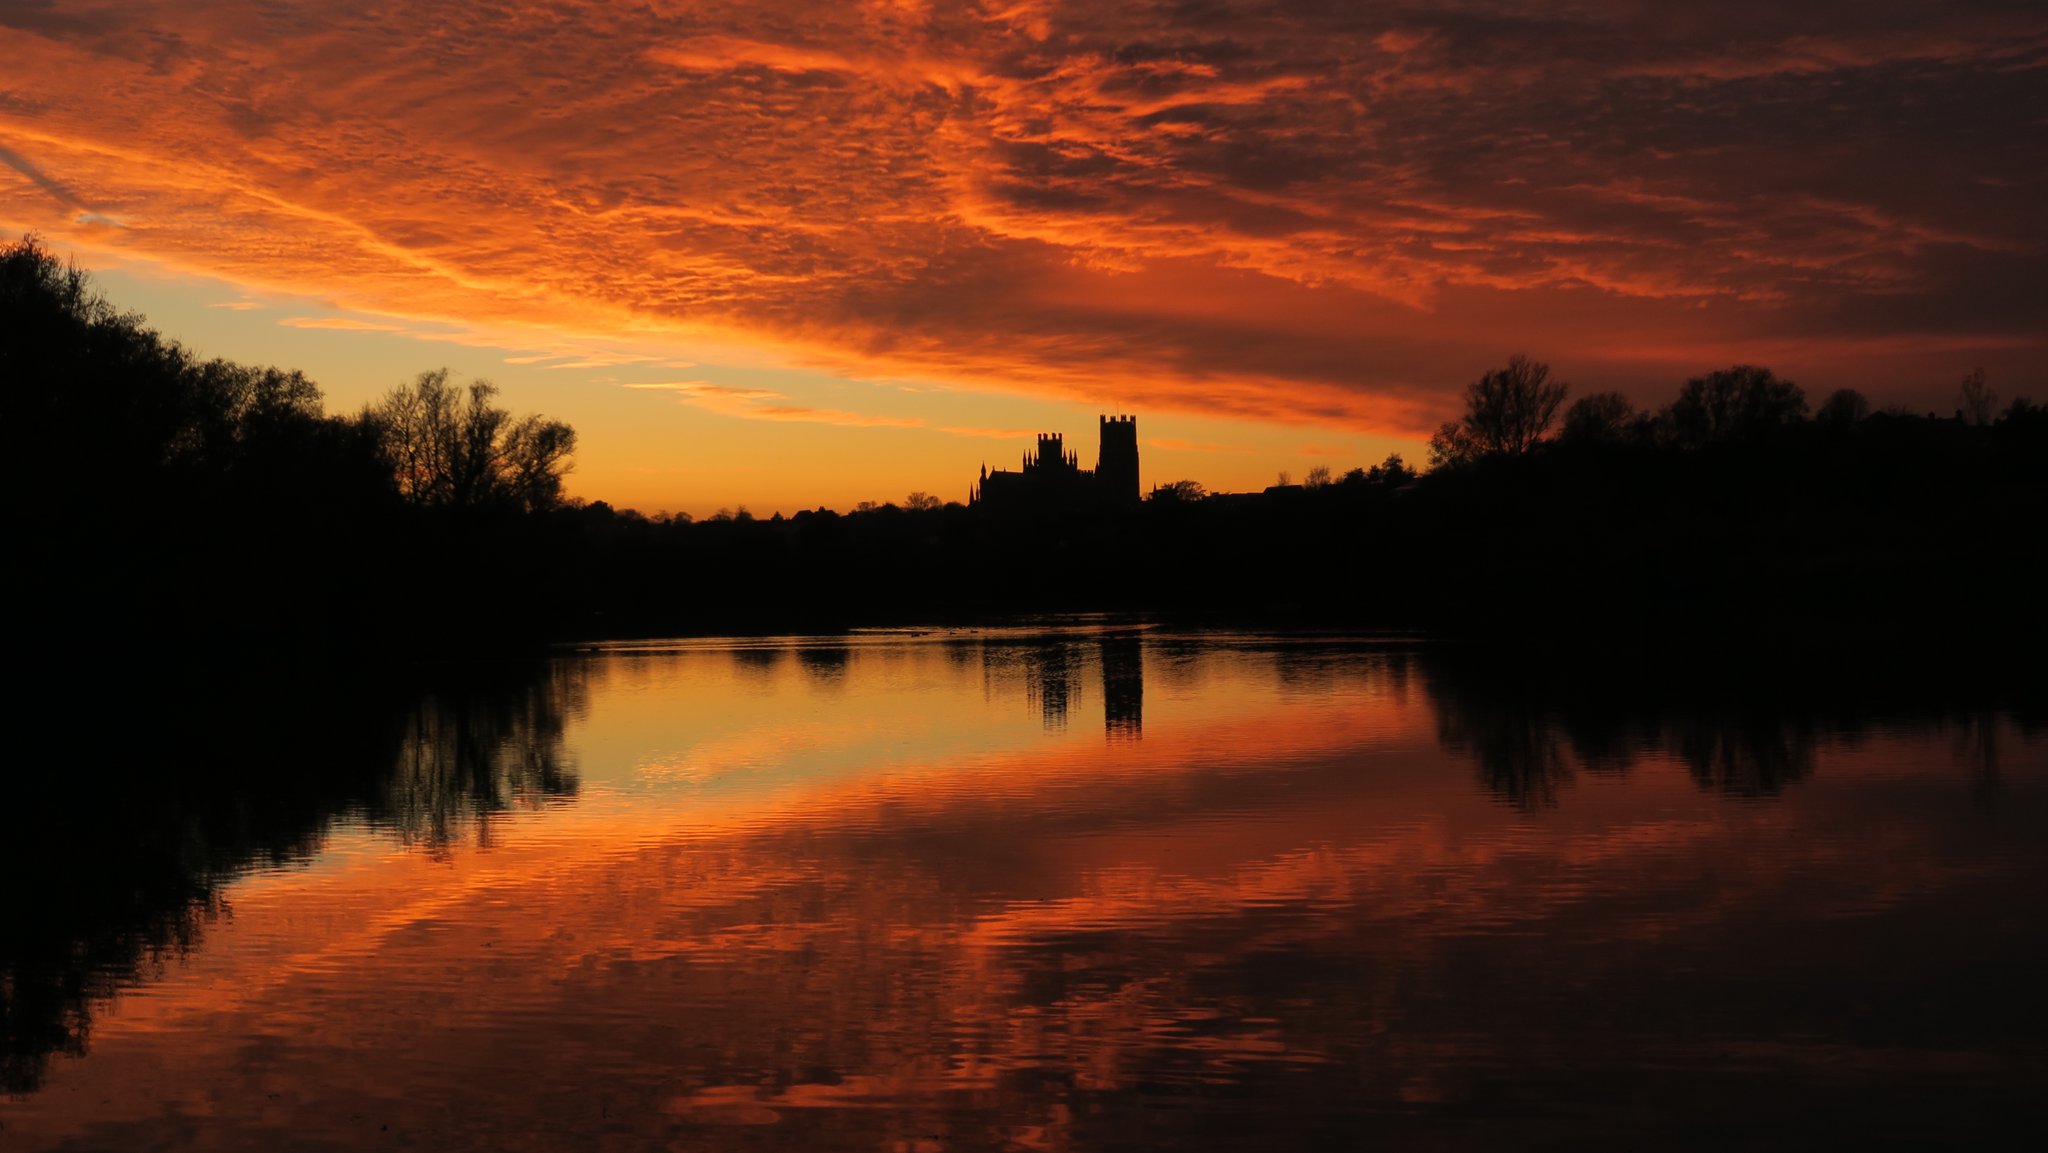 2nd Place amazing sunset over Ely Cathedral, Cambridgeshire by LivingRightNow @majestical_pix